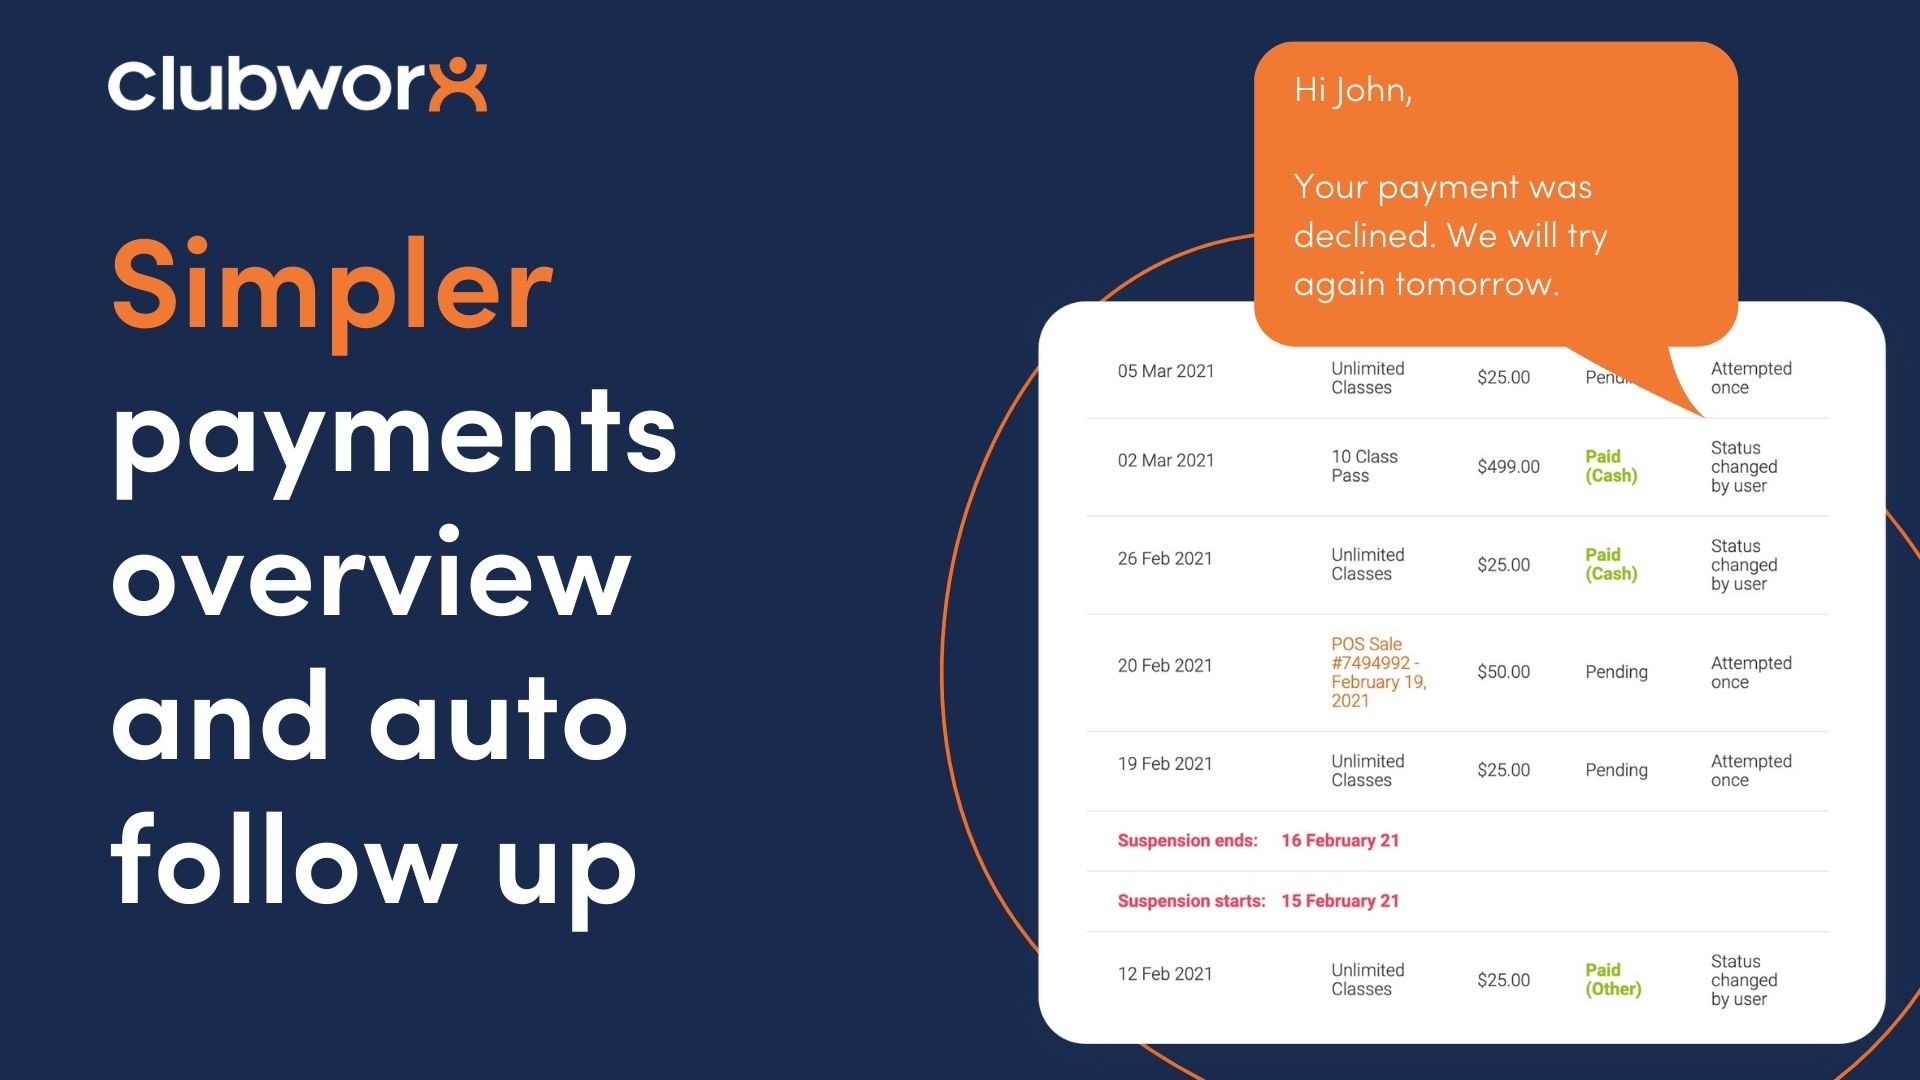 Simpler payments overview